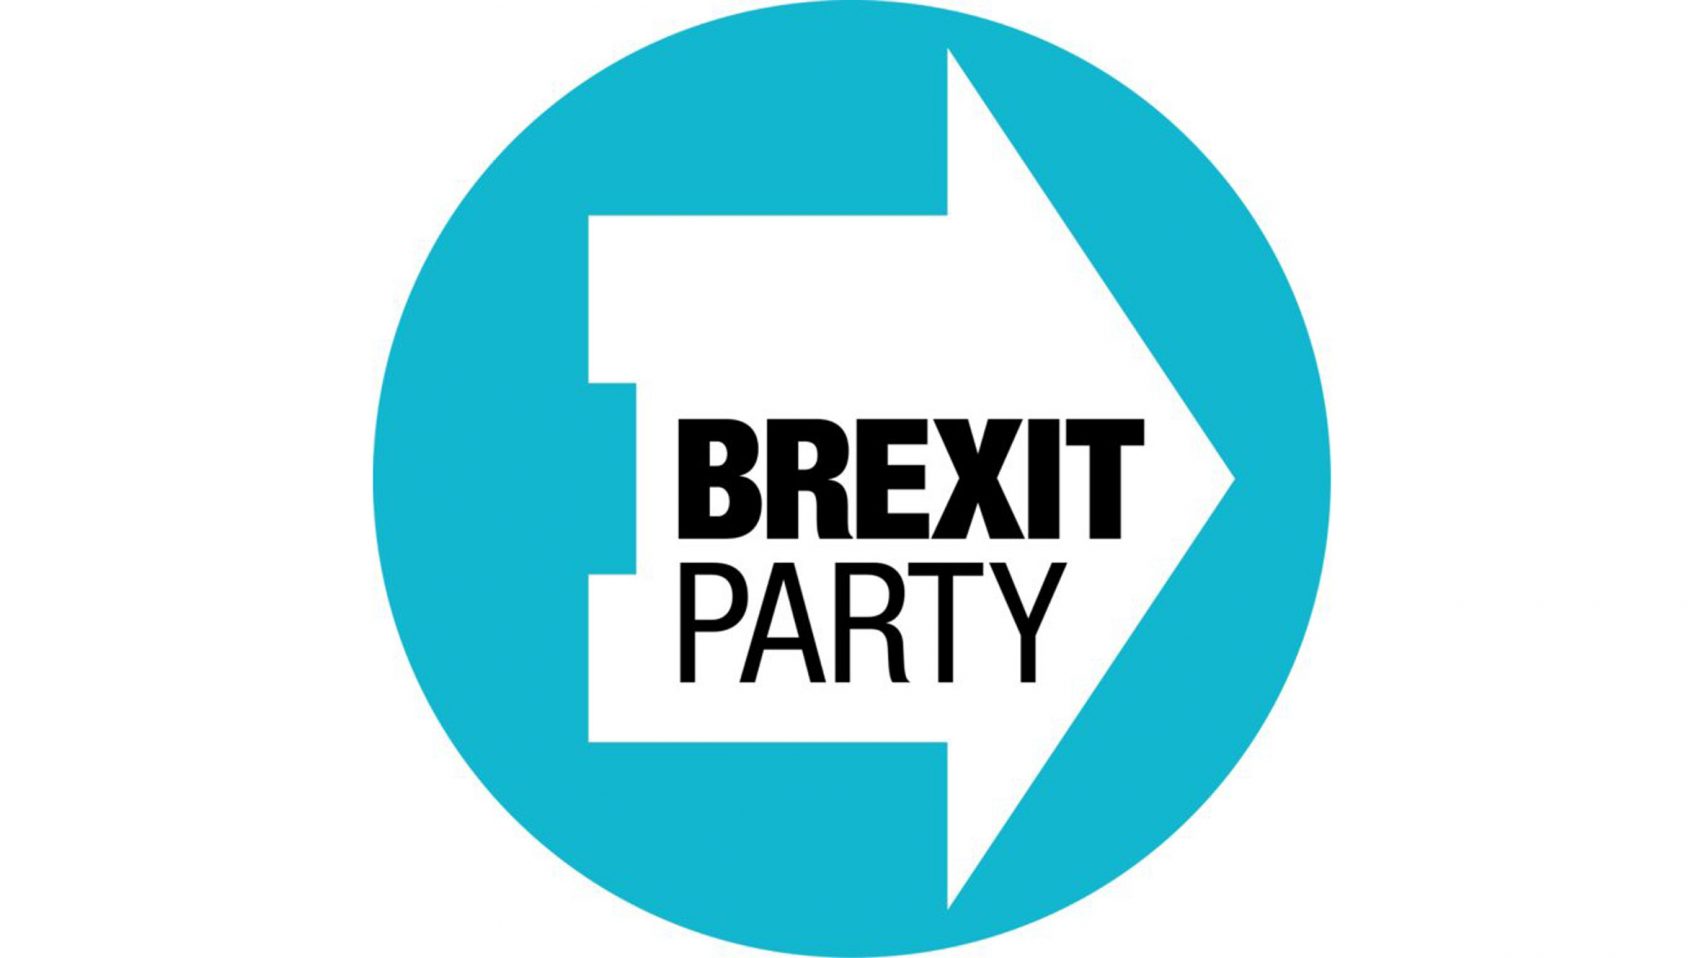 ELECTION 2019: Brexit Party candidate inspired to quit by Daily Mail